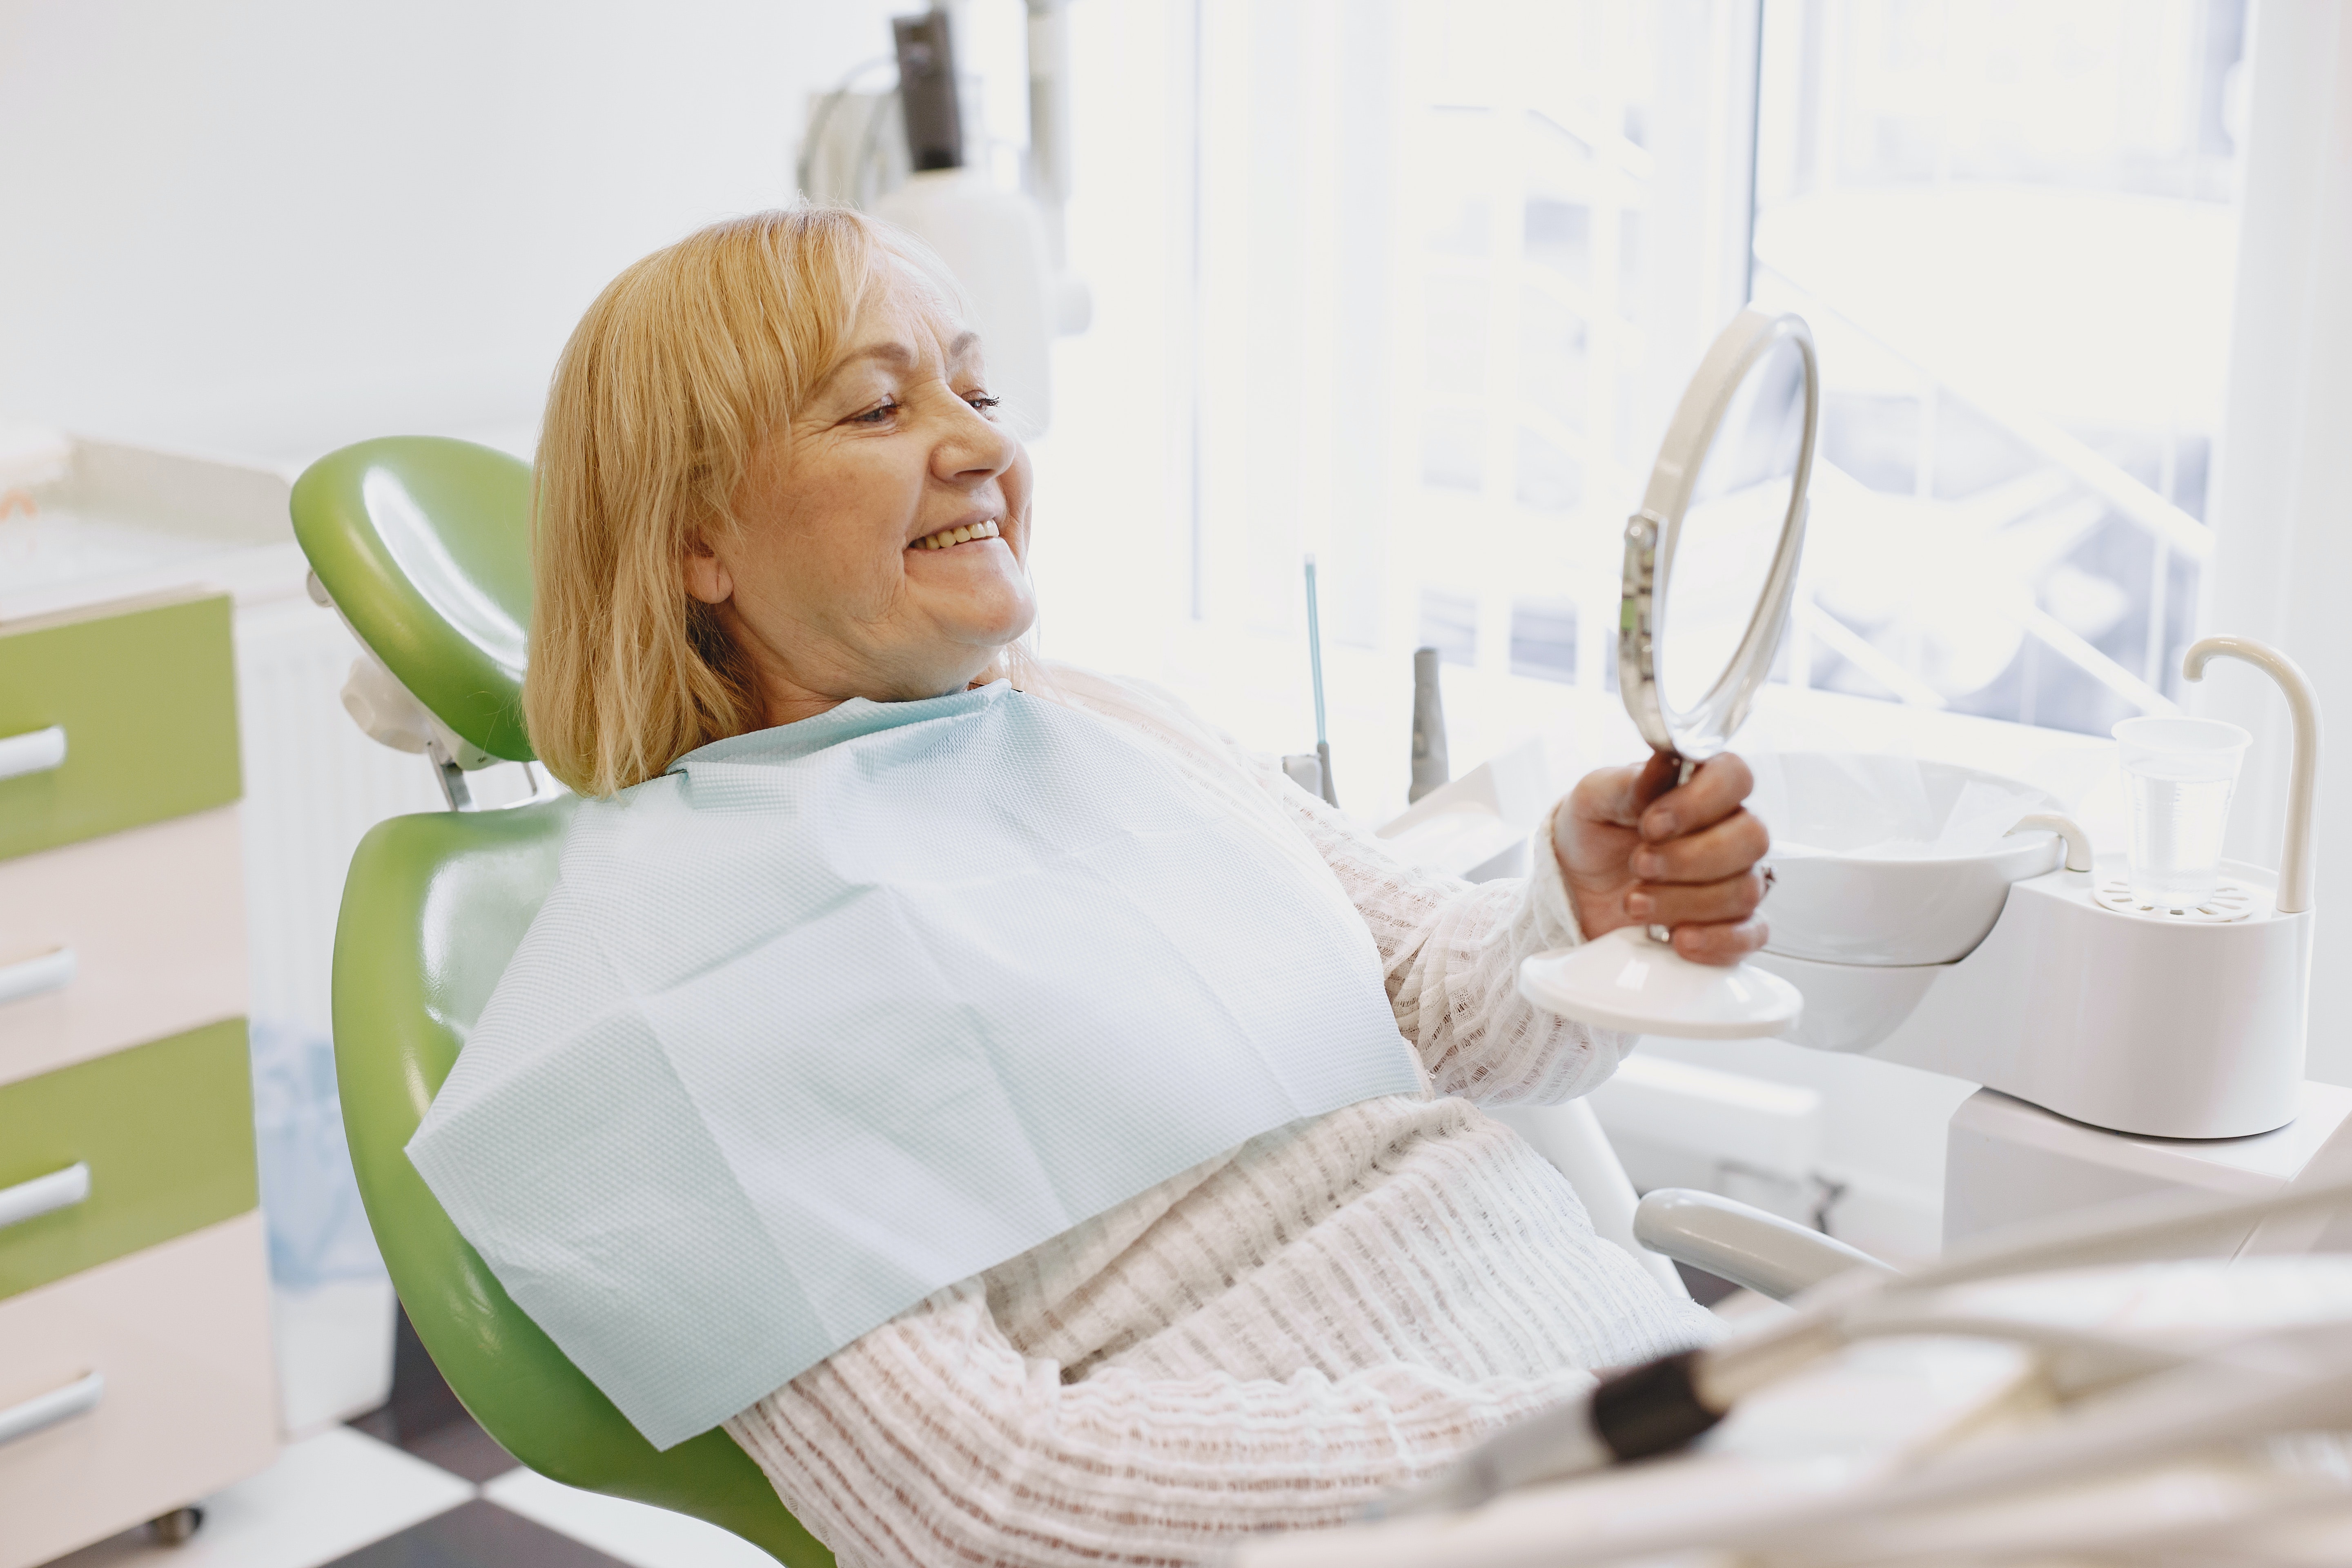 Transitioning From Dentures to Dental Implants